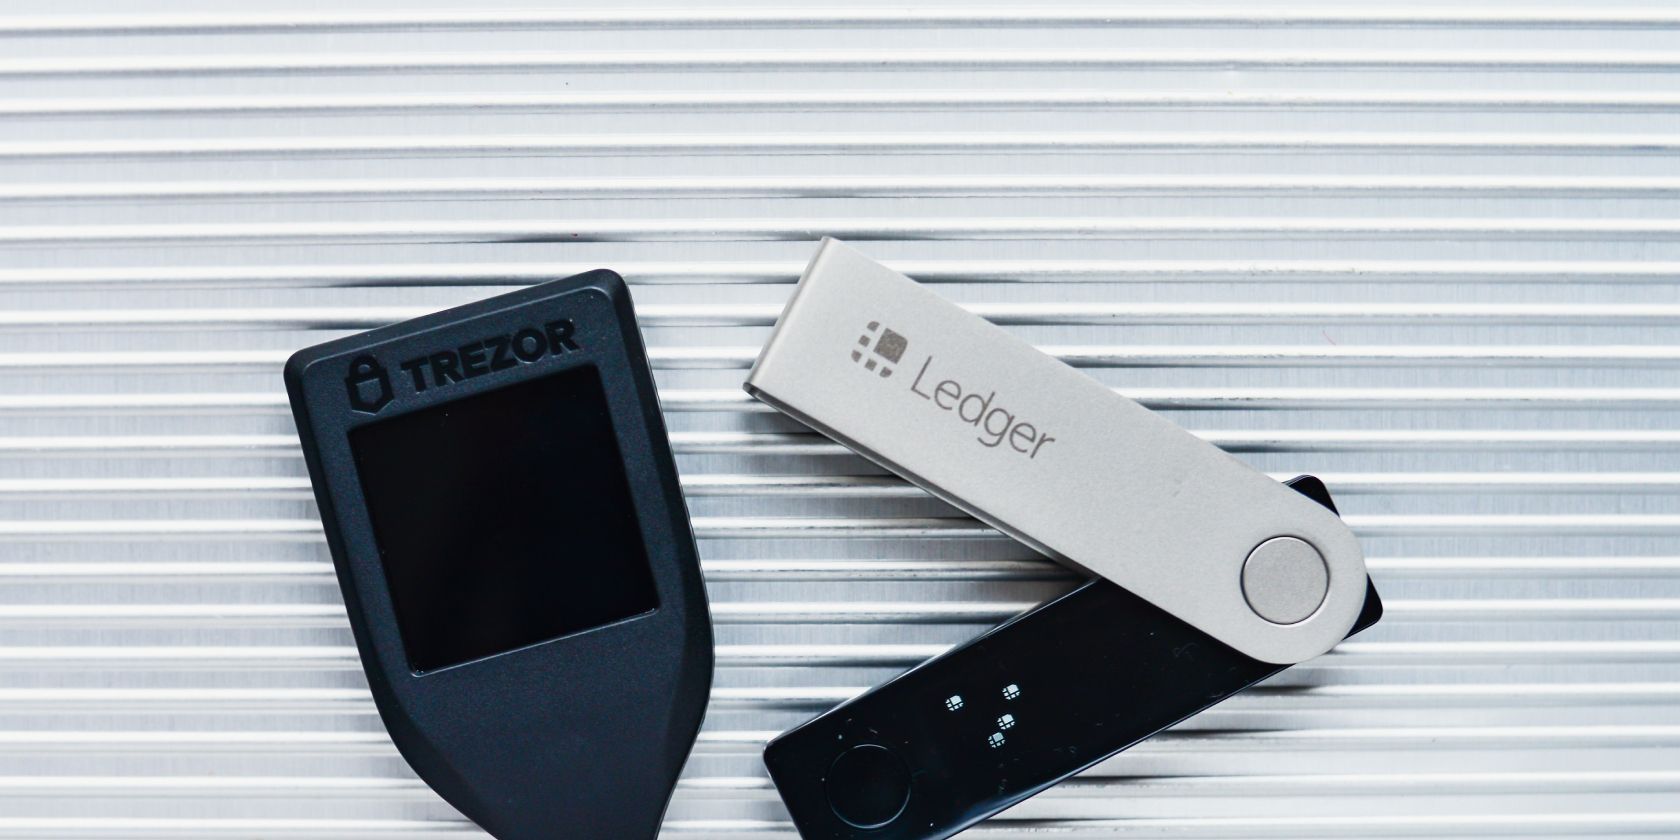 trezor and ledger hardware wallets on a white metal background